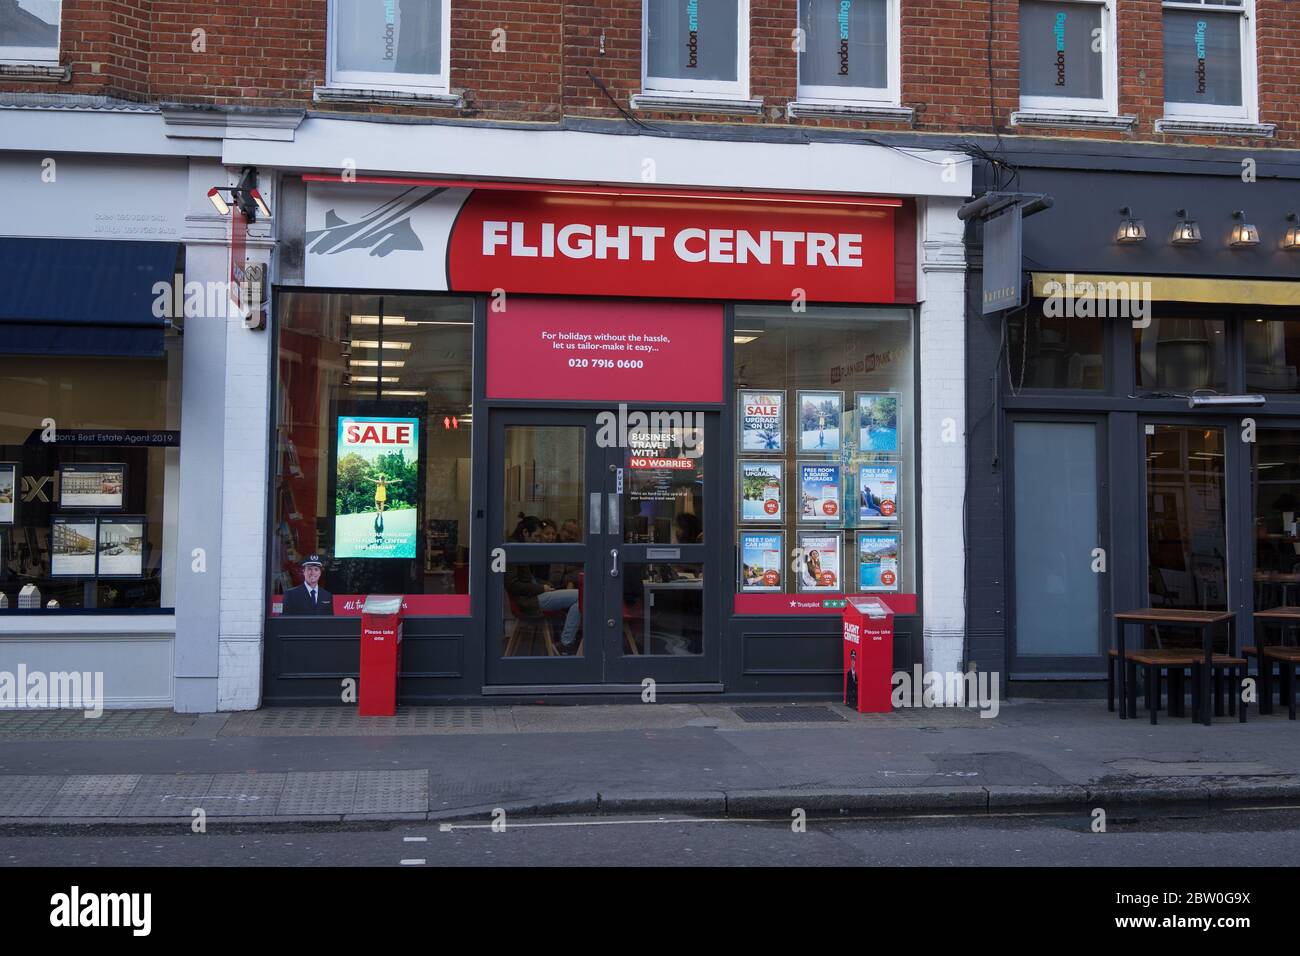 The Flight Centre Travel Agent Store On The Town Centre Street London 5995